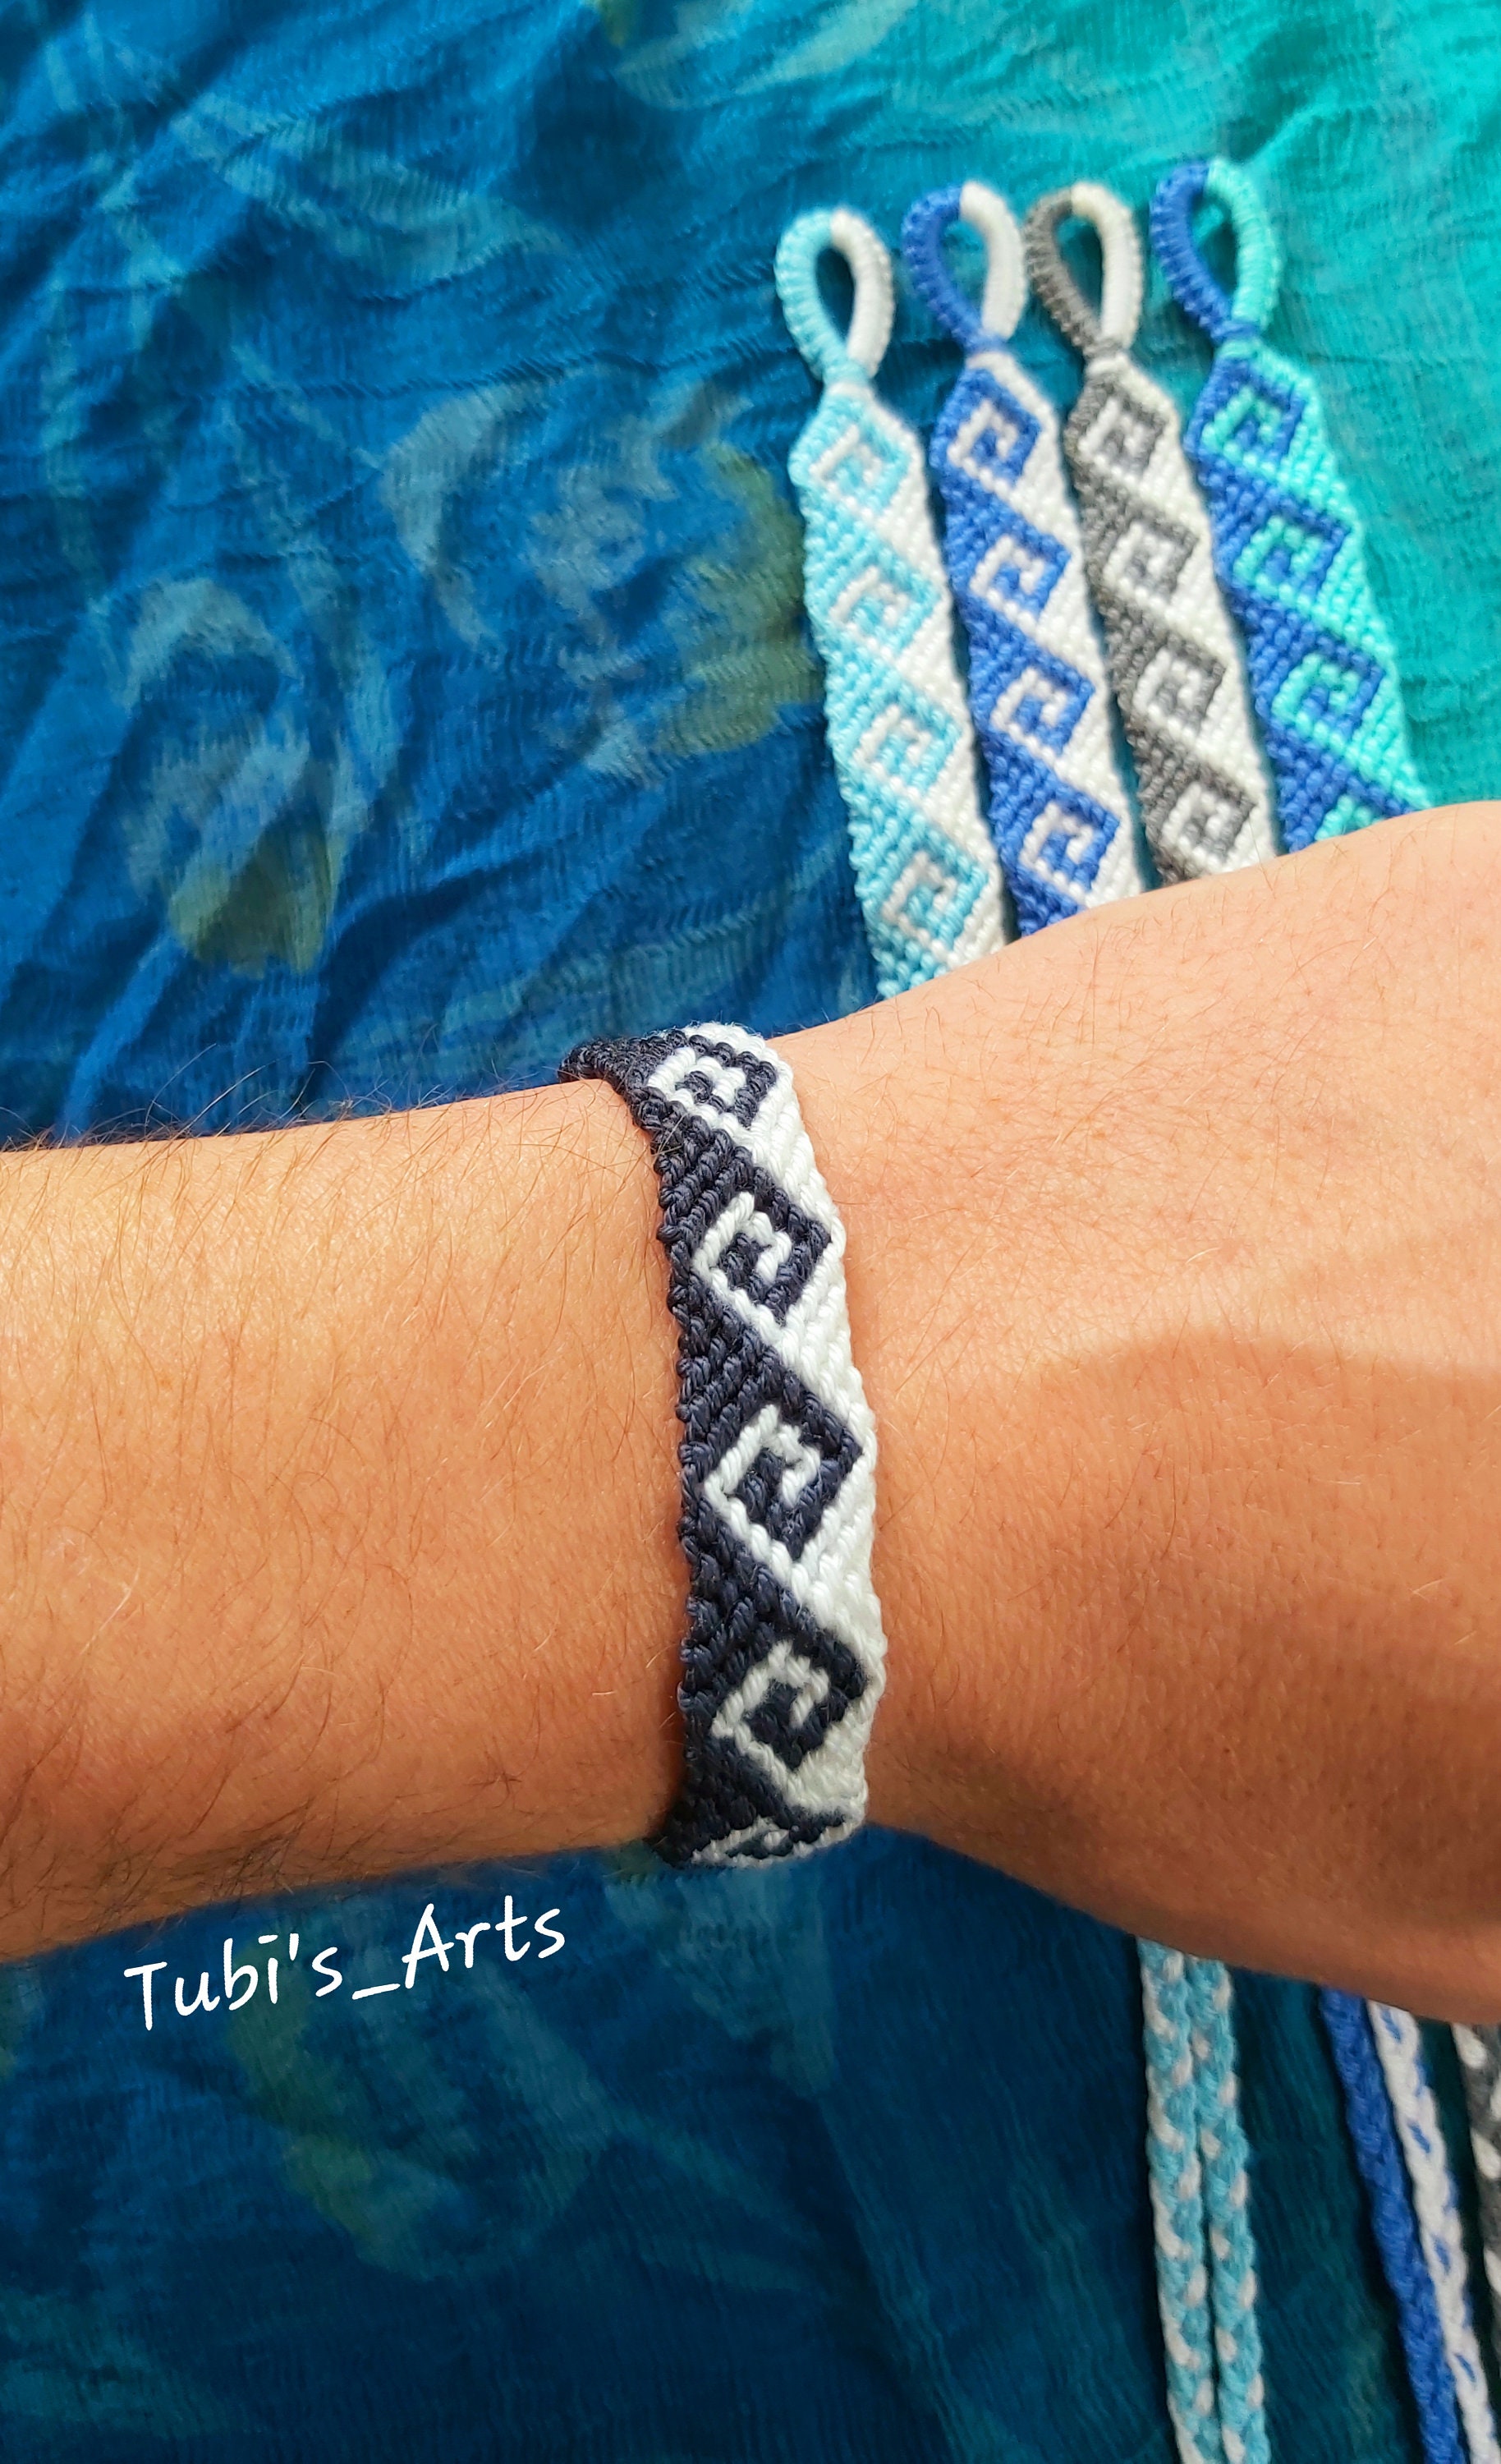 Boho Wave Woven Friendship Bracelet With Greek Embroidery For Women And Men  Light Blue, Dark Blue Black, And White Beach Surf Boho Jewelry From  Chicmemo, $26.77